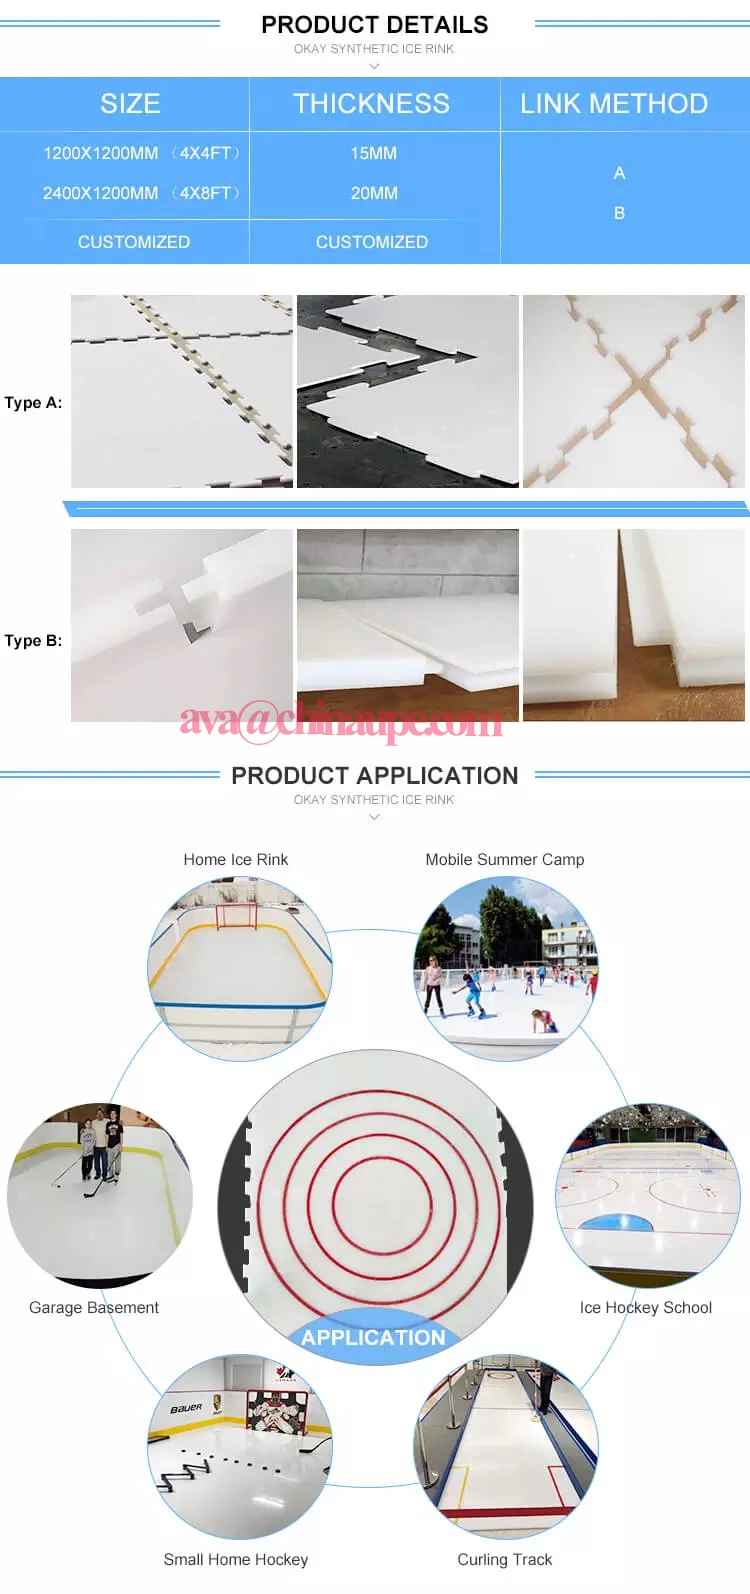 Dryland Hockey Shot Revolution UHMWPE Synthetic Ice Tiles for Sale